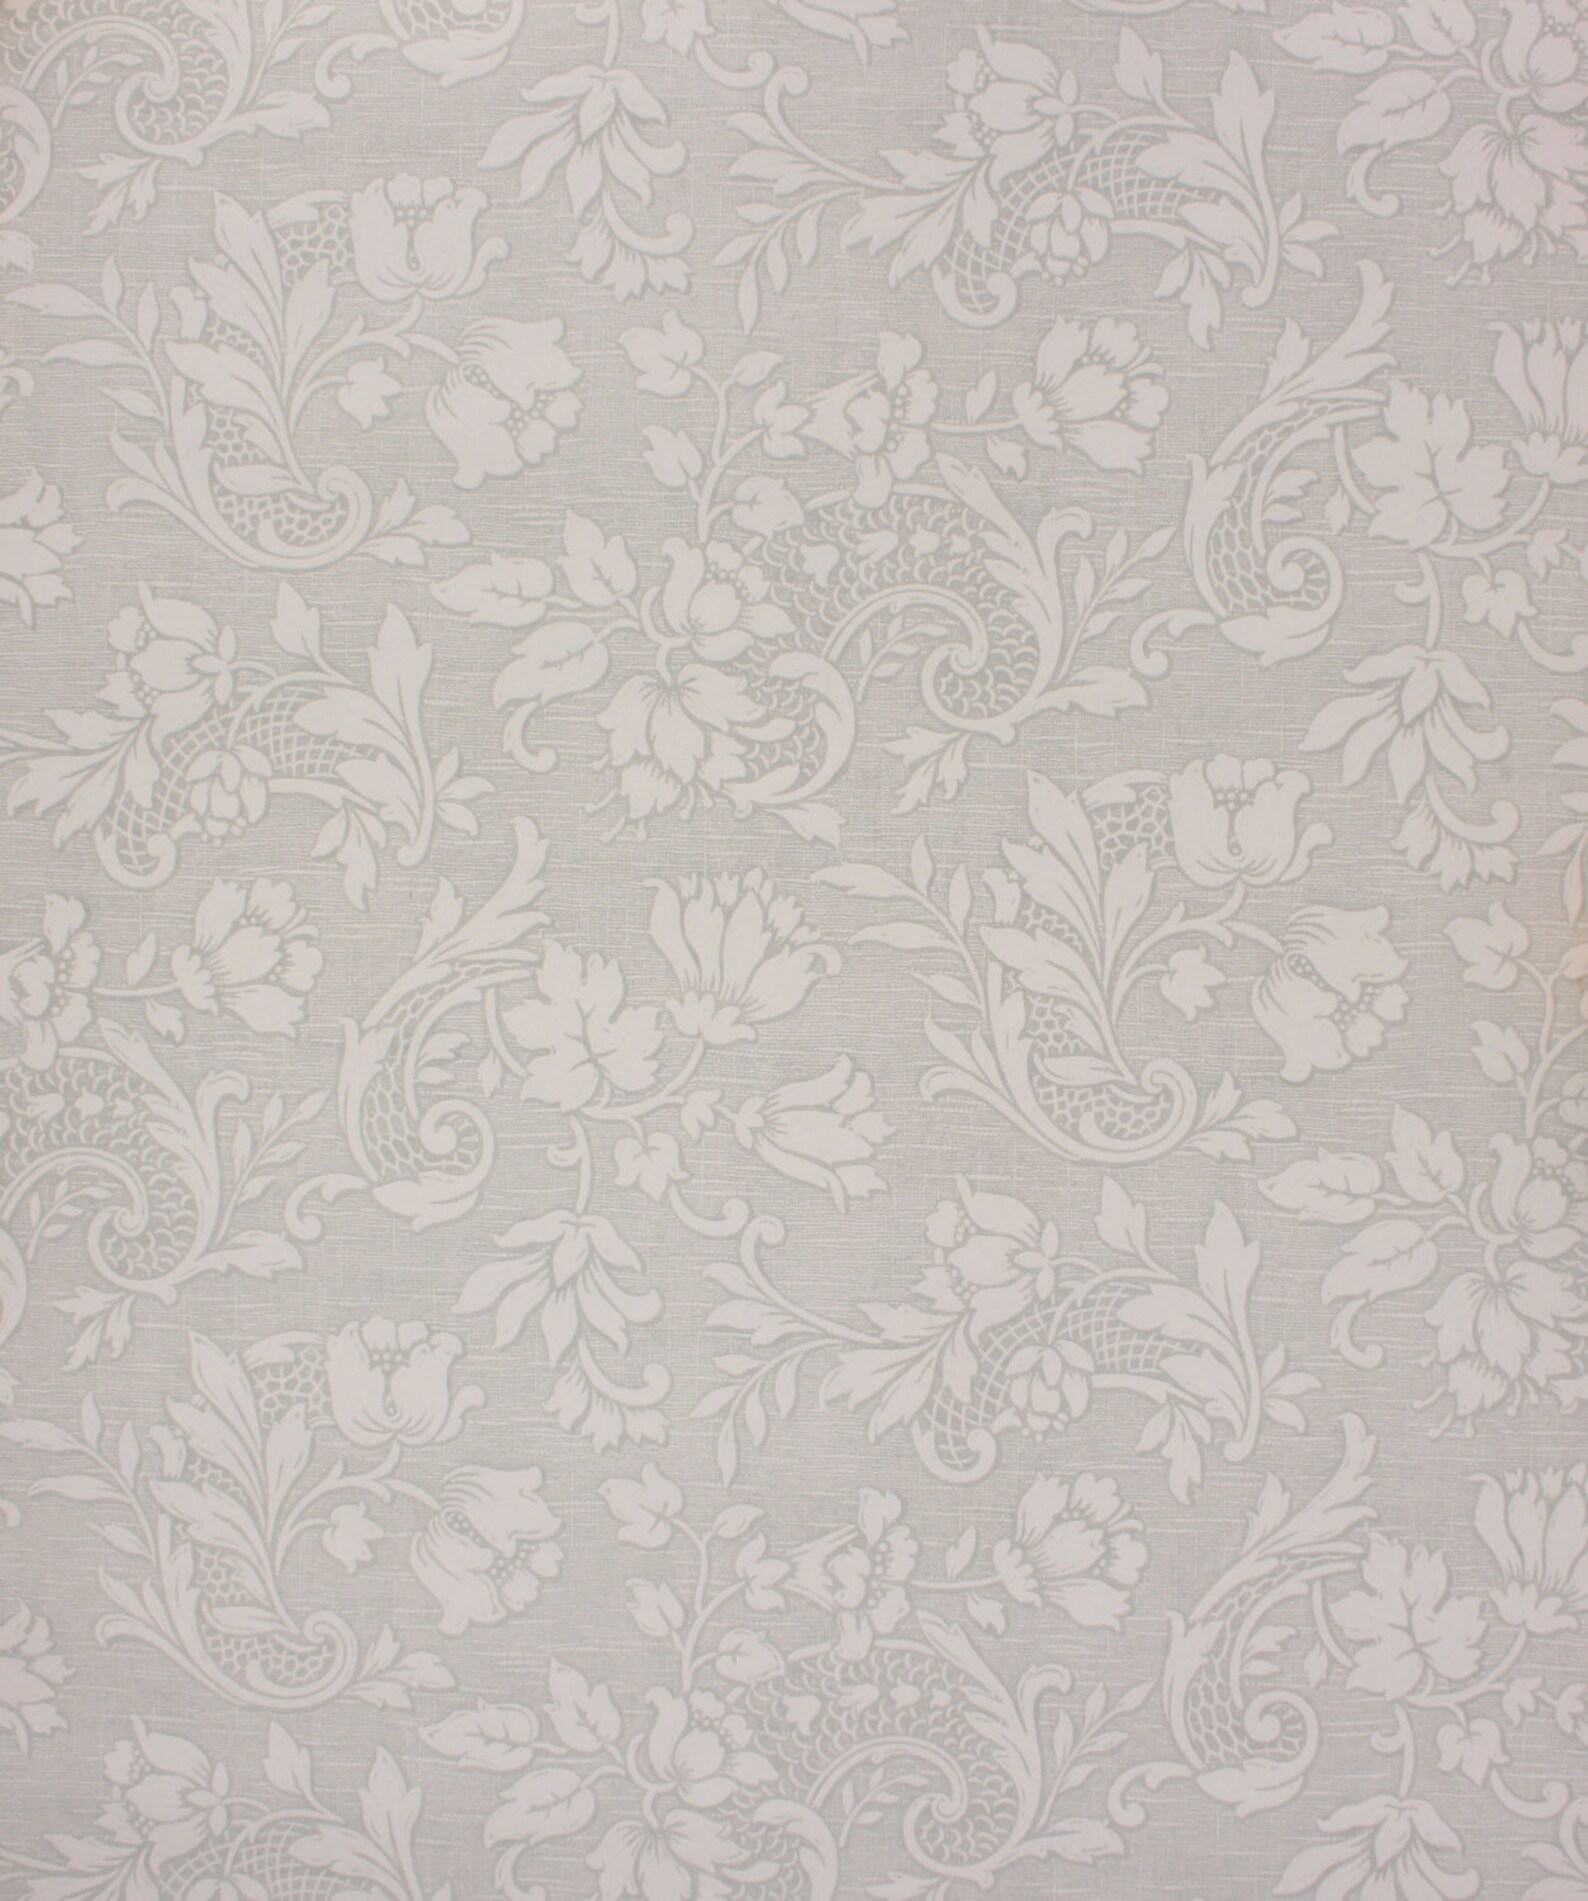 1960's Vintage Wallpaper Textured Embossed White Floral on - Etsy